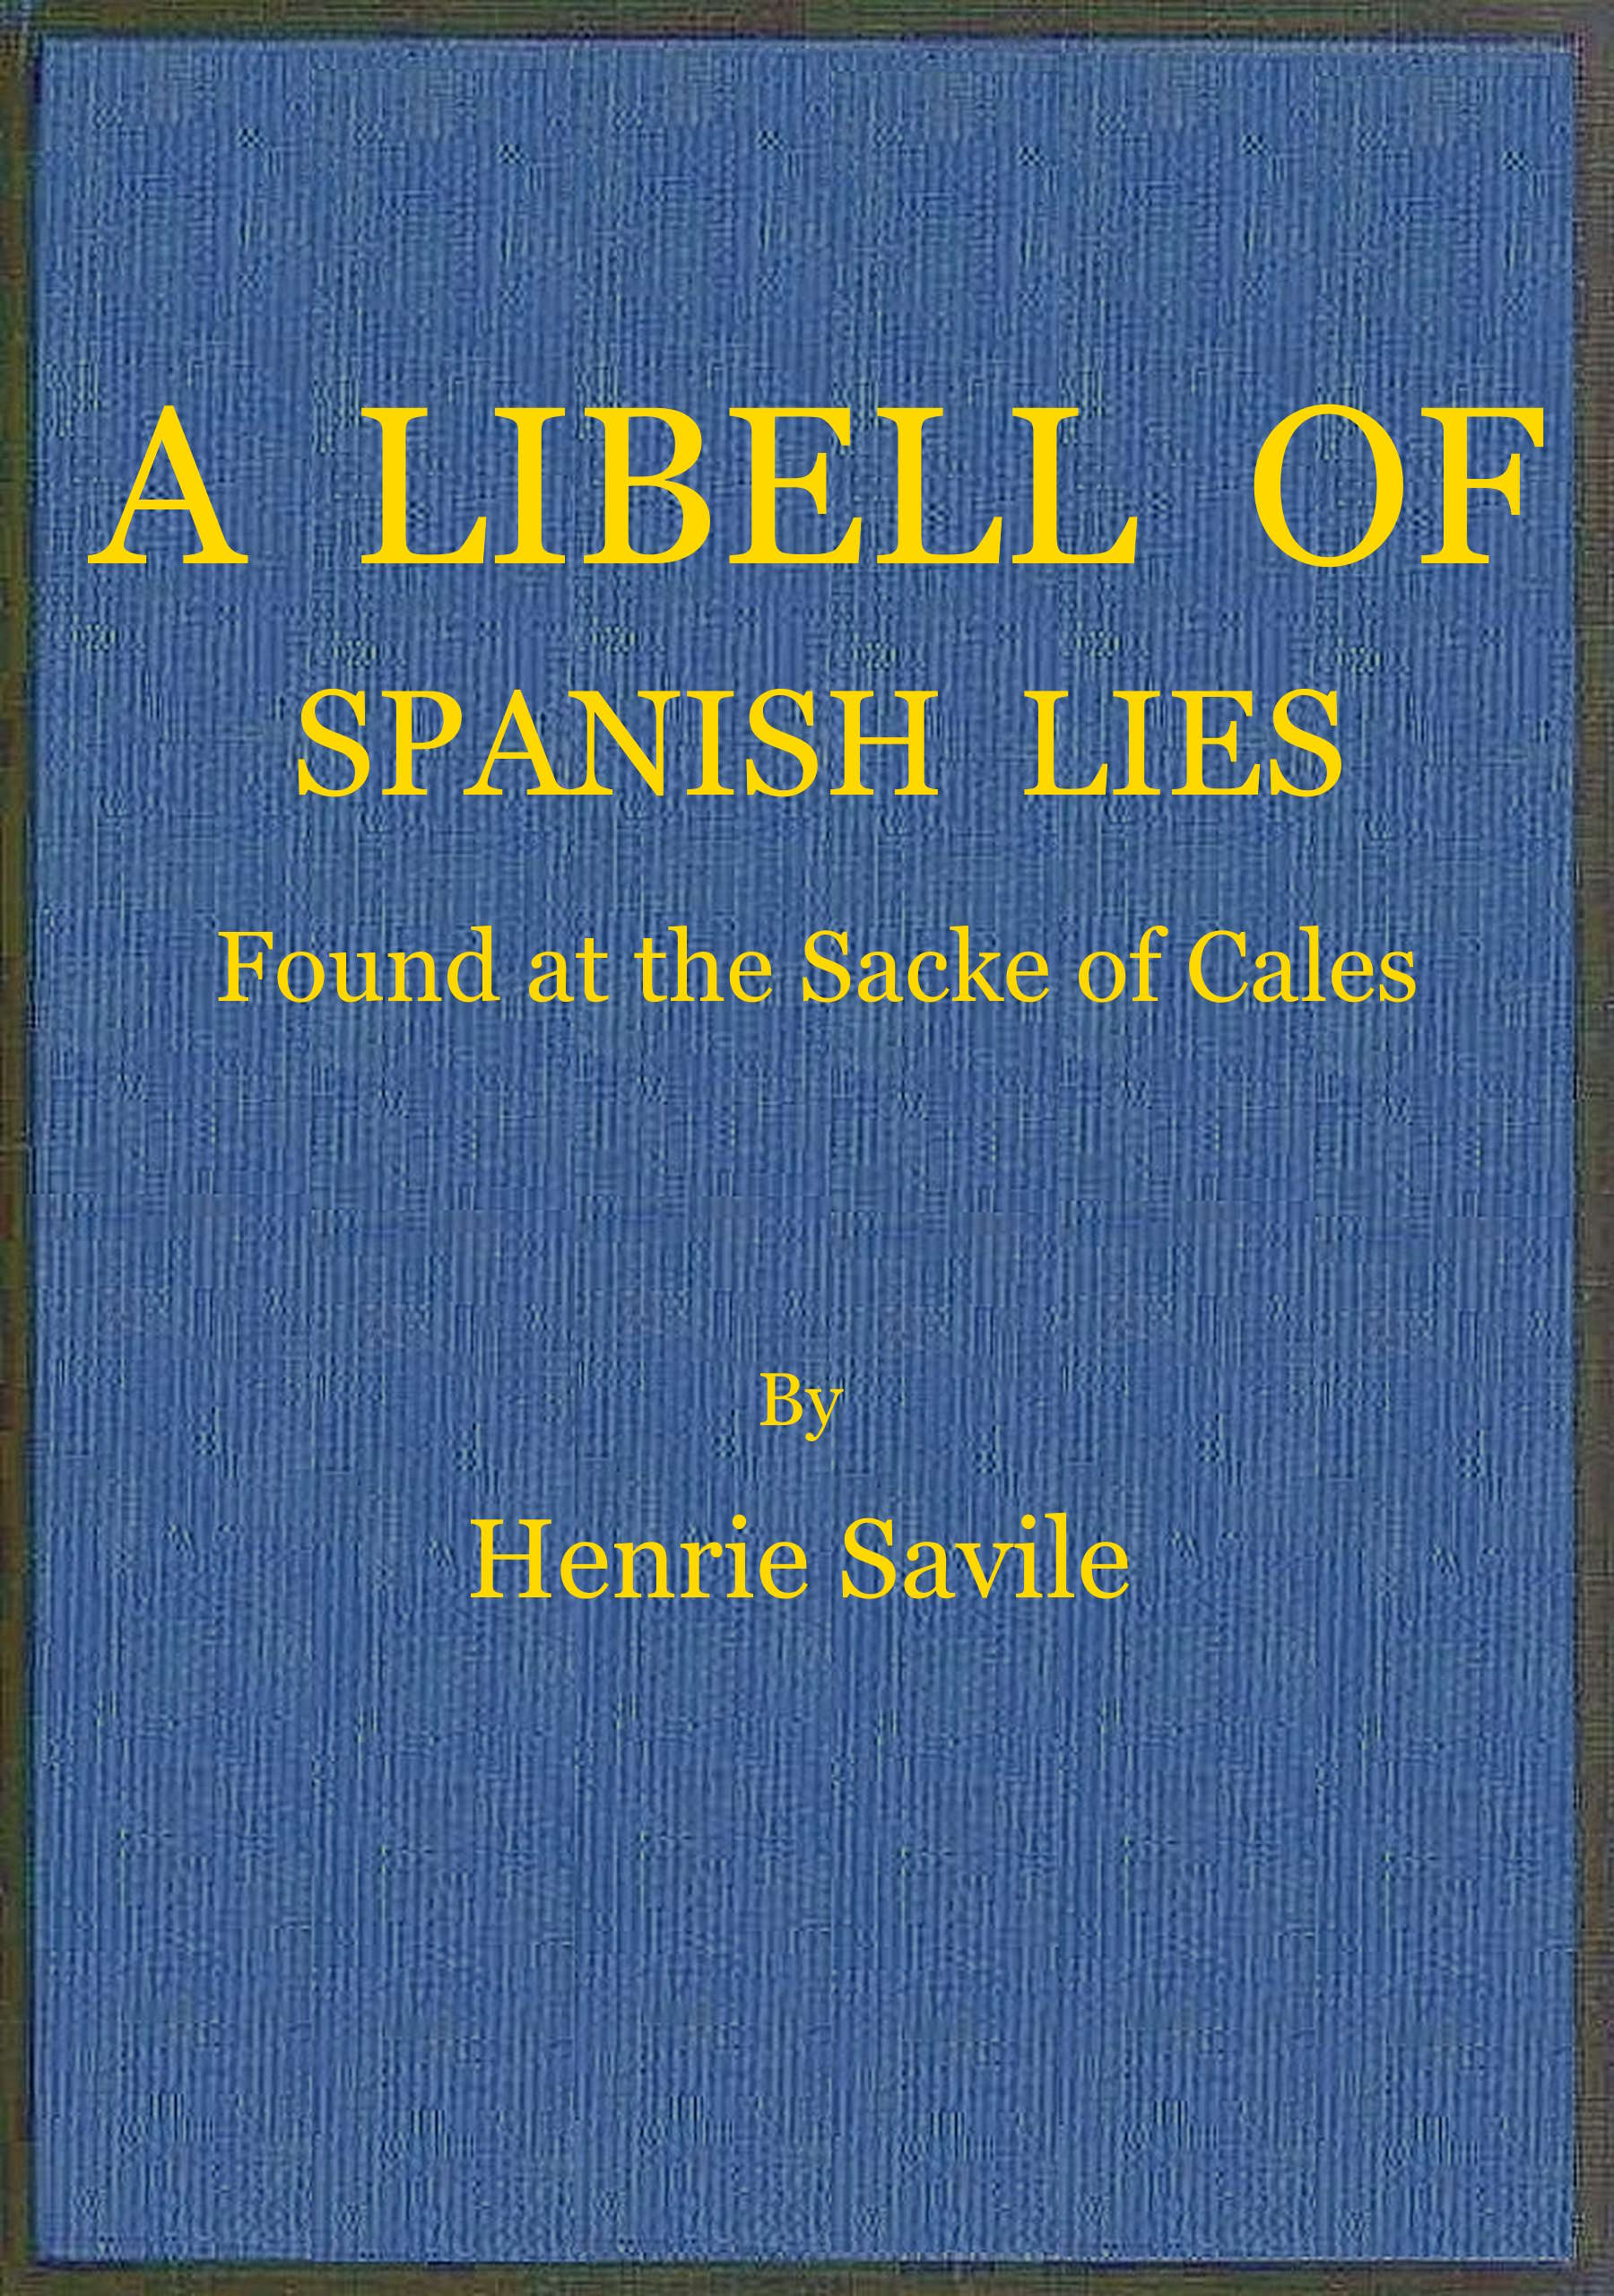 A libell of Spanish lies